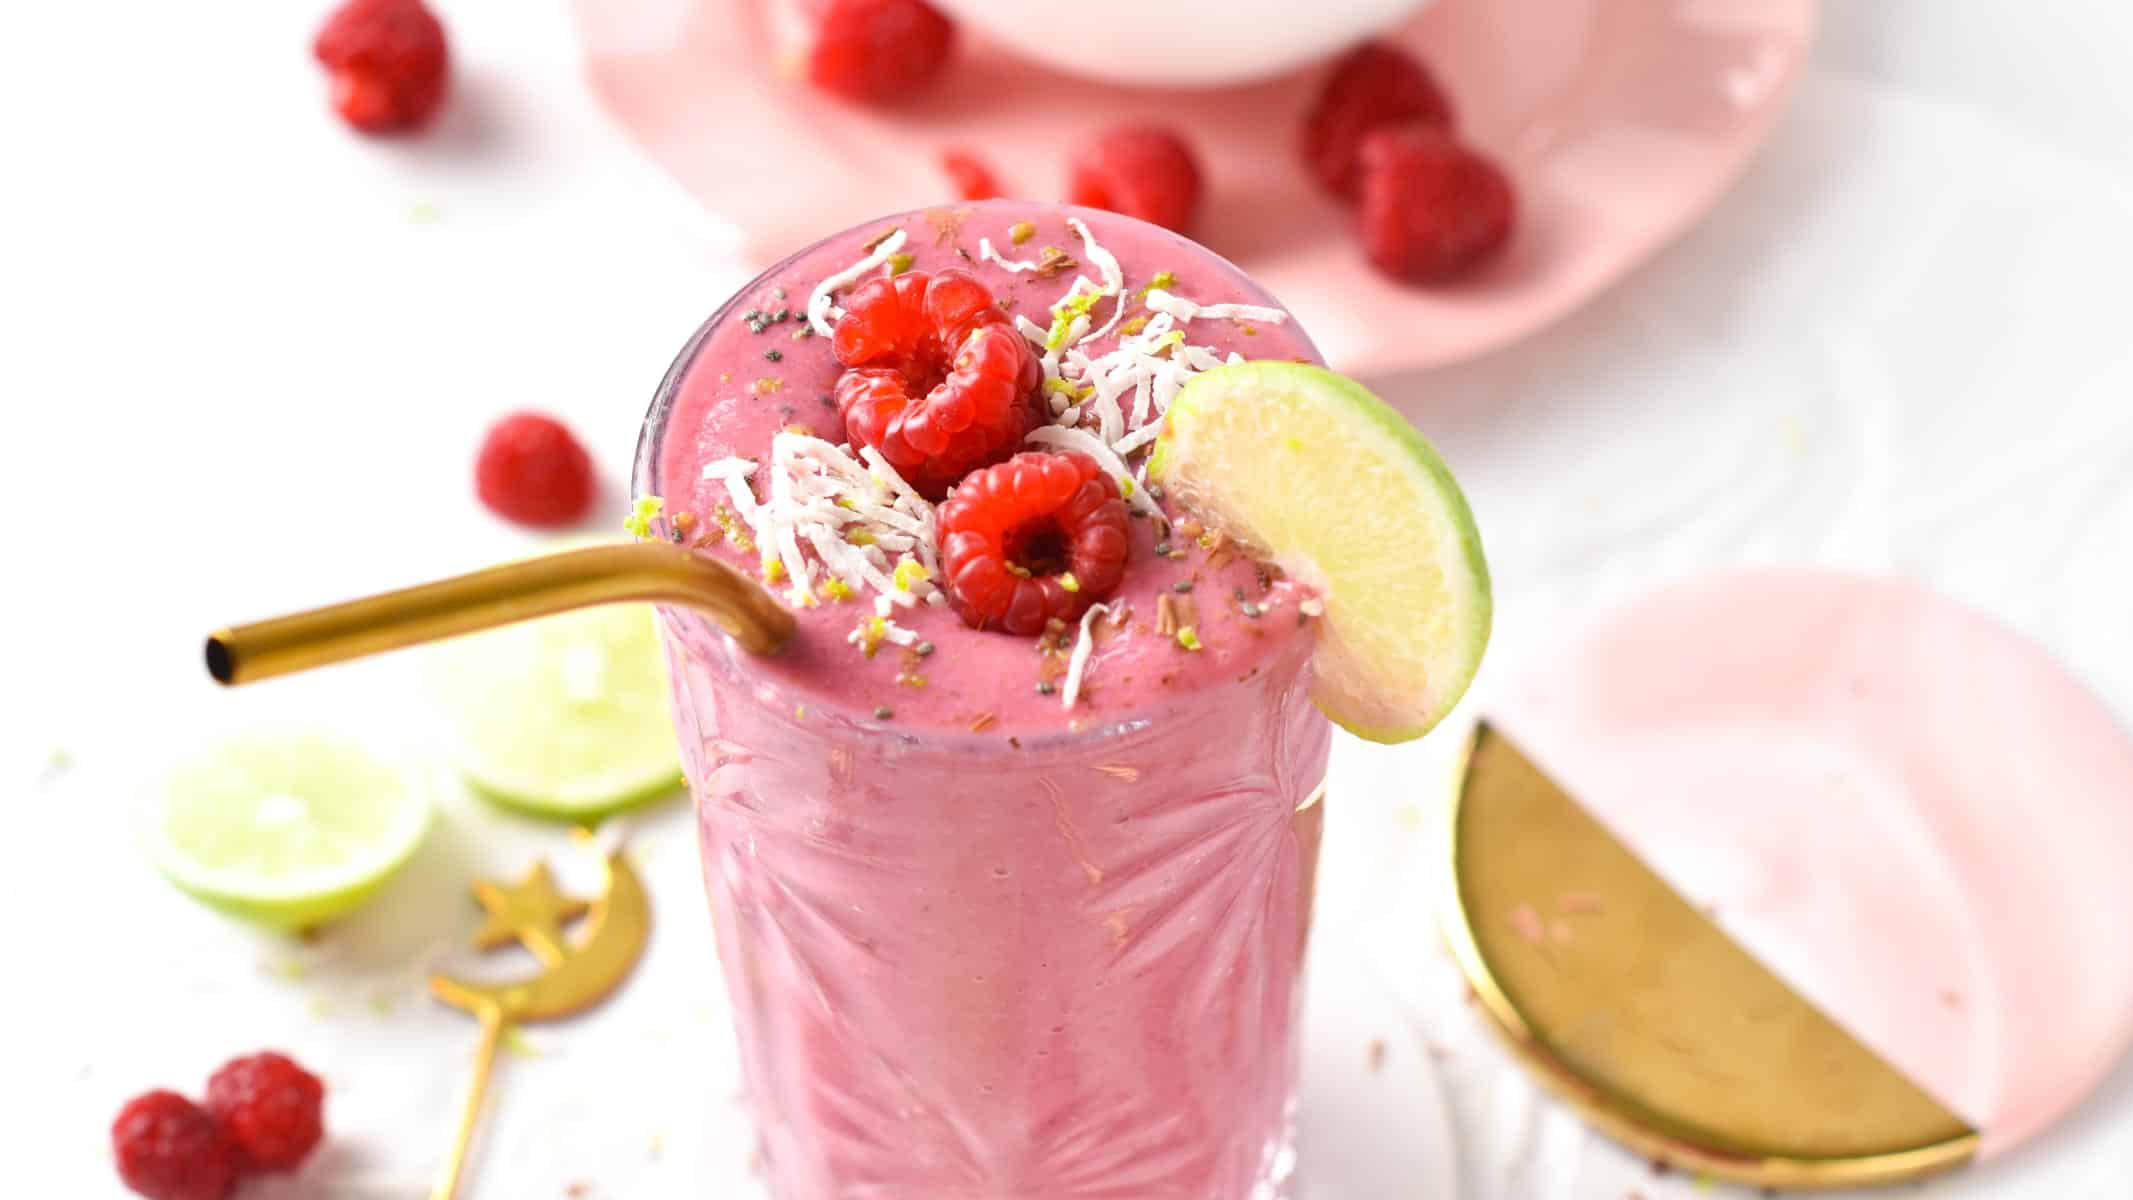 This Raspberry Smoothie recipe is the most refreshing smoothie with vibrant pink colors. Plus, raspberries are low-sugar and packed with antioxidants to pack inflammation.